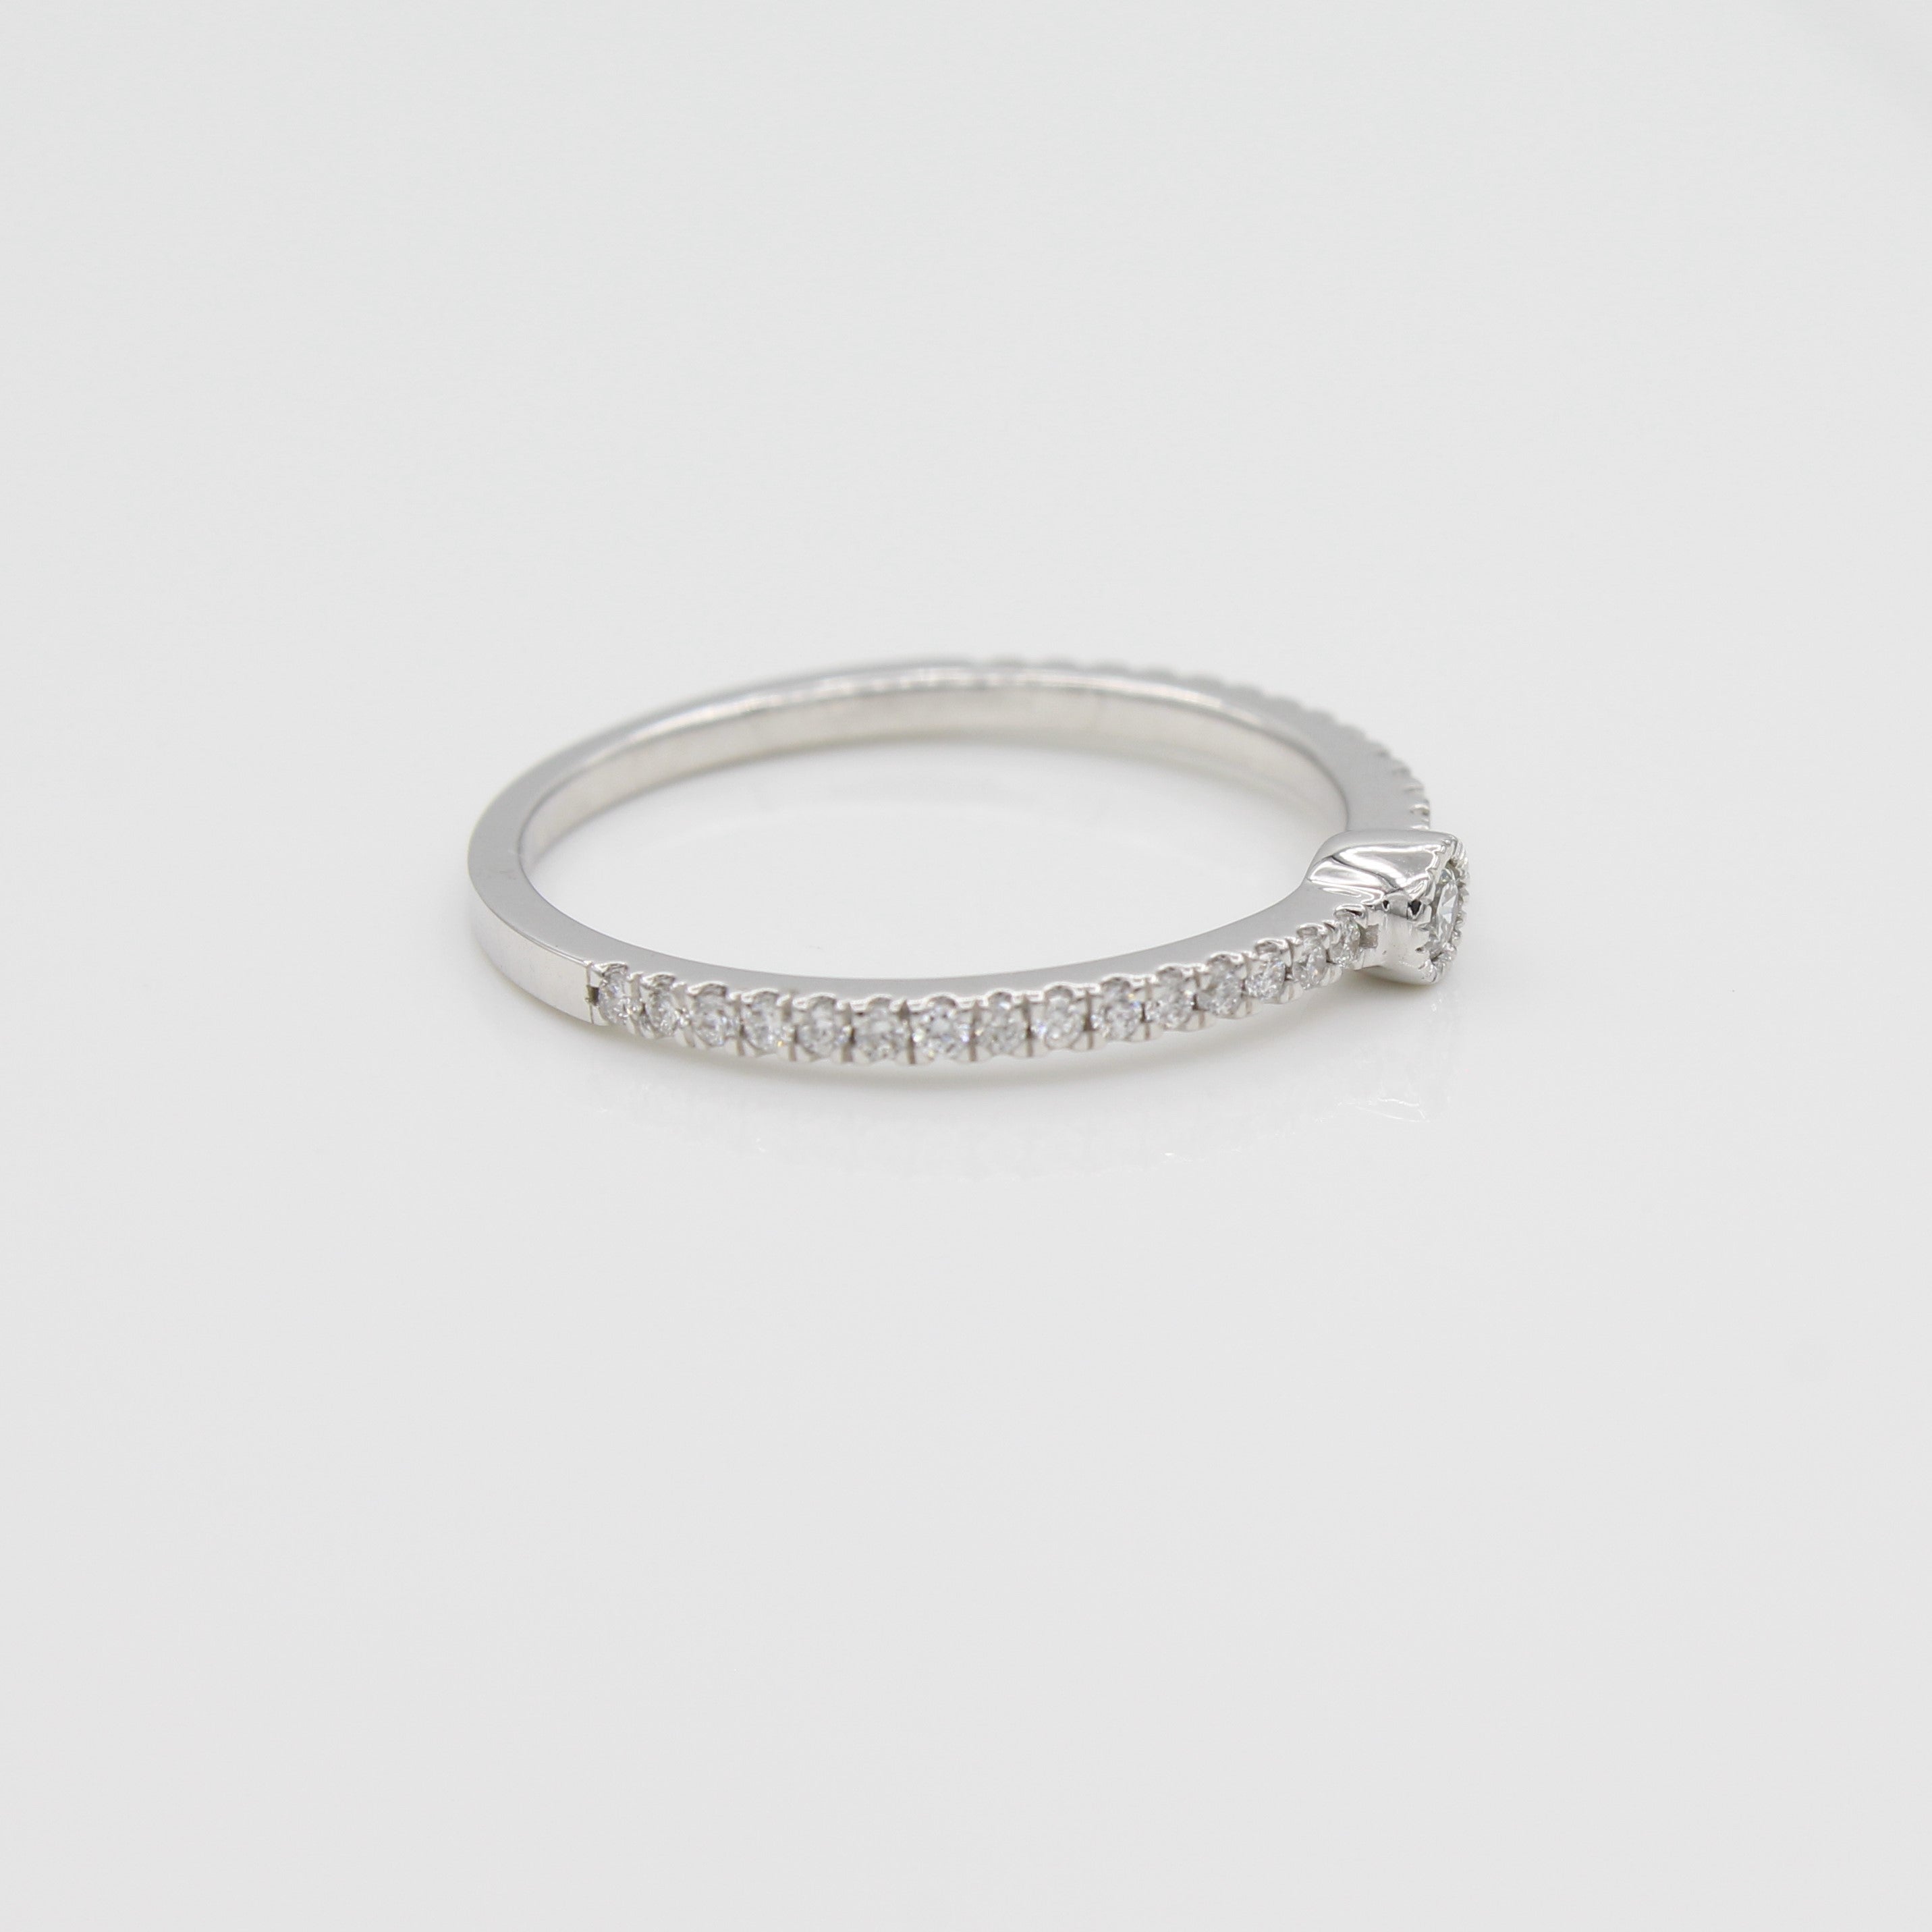 14k White Gold Single Bezel-Set Diamond Station Ring with Micro-Pave Band, side view from left.